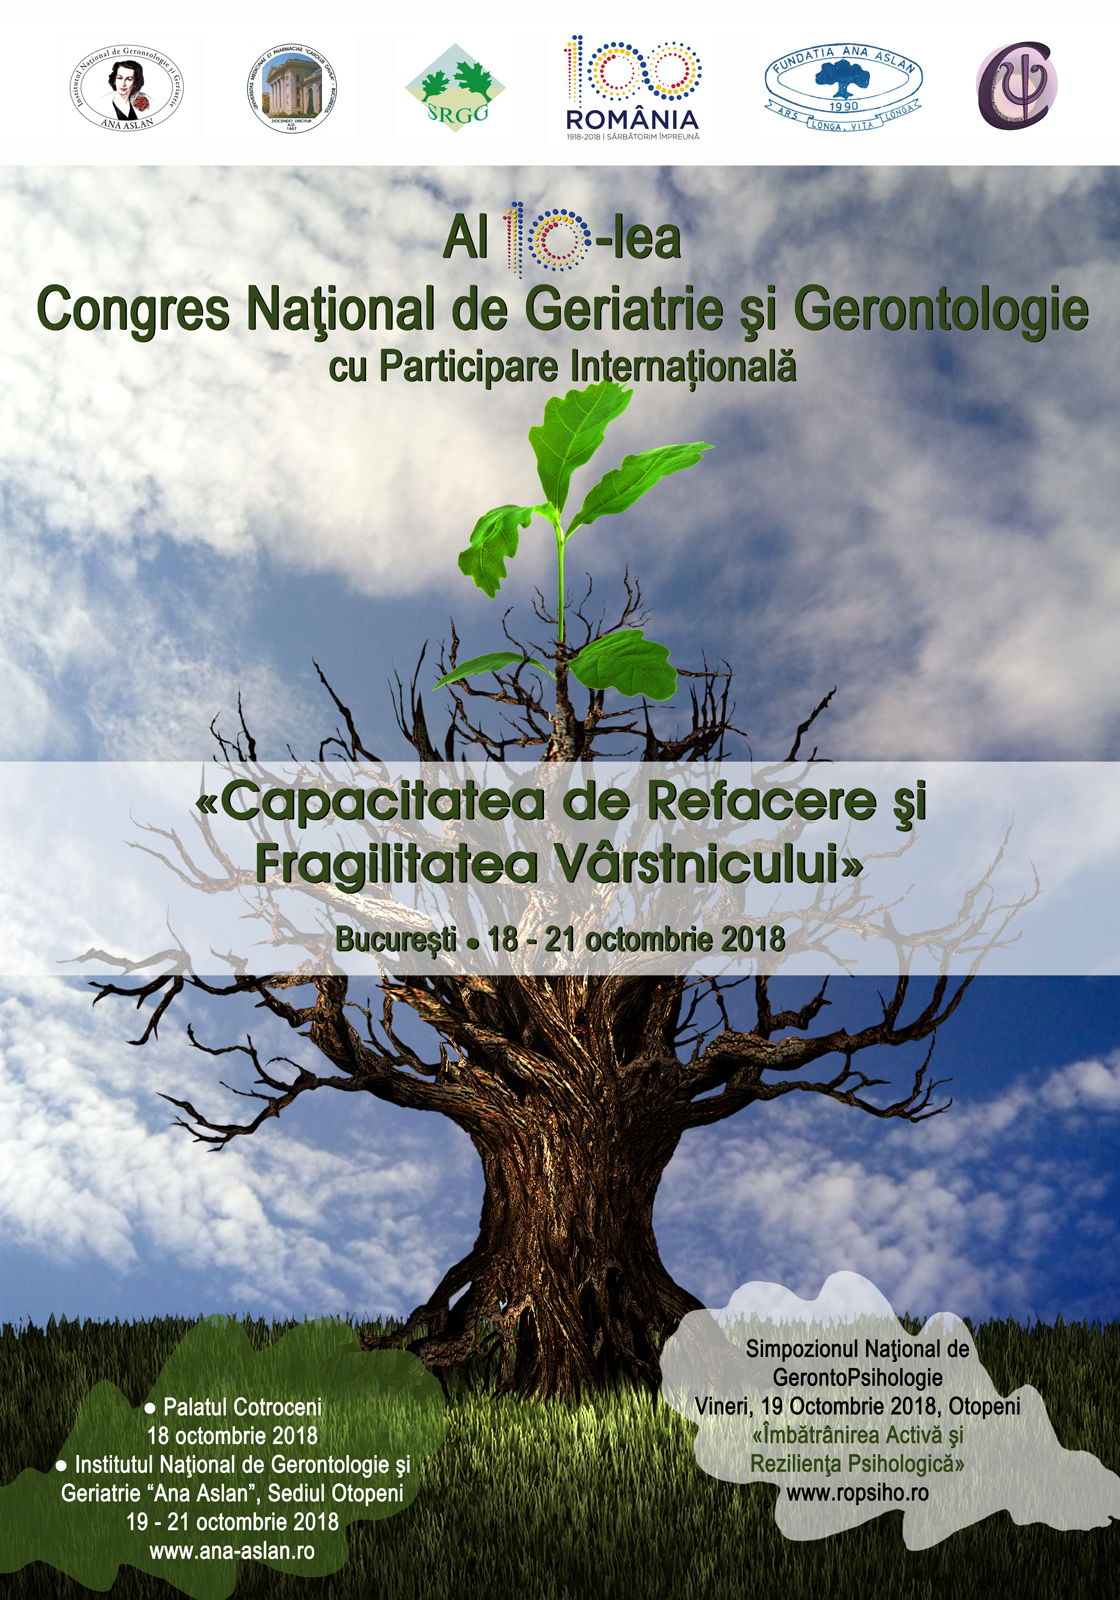 10TH NATIONAL CONGRESS OF GERIATRICS AND GERONTOLOGY WITH INTERNATIONAL PARTICIPATION